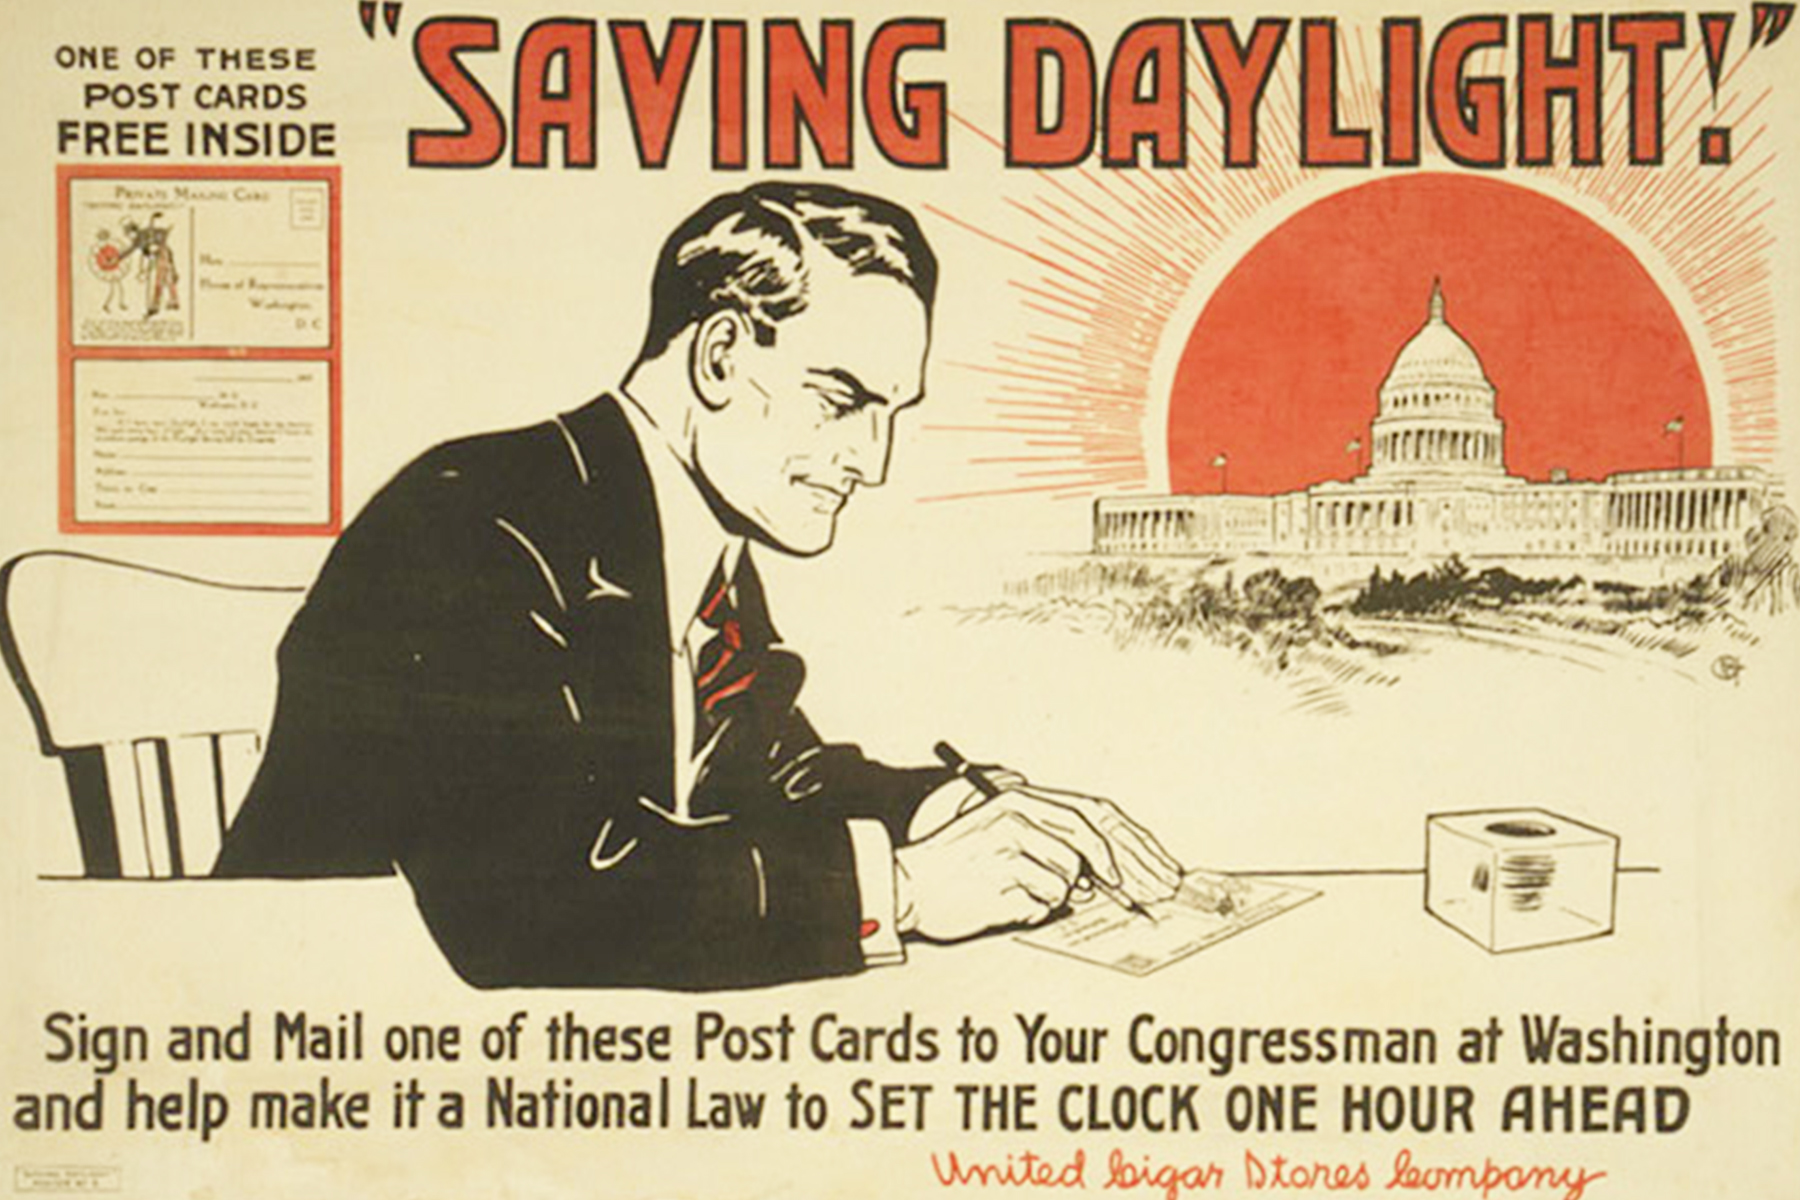 Daylight Saving Time: Maps Show Why We Disagree About 'Spring Forward' -  Bloomberg